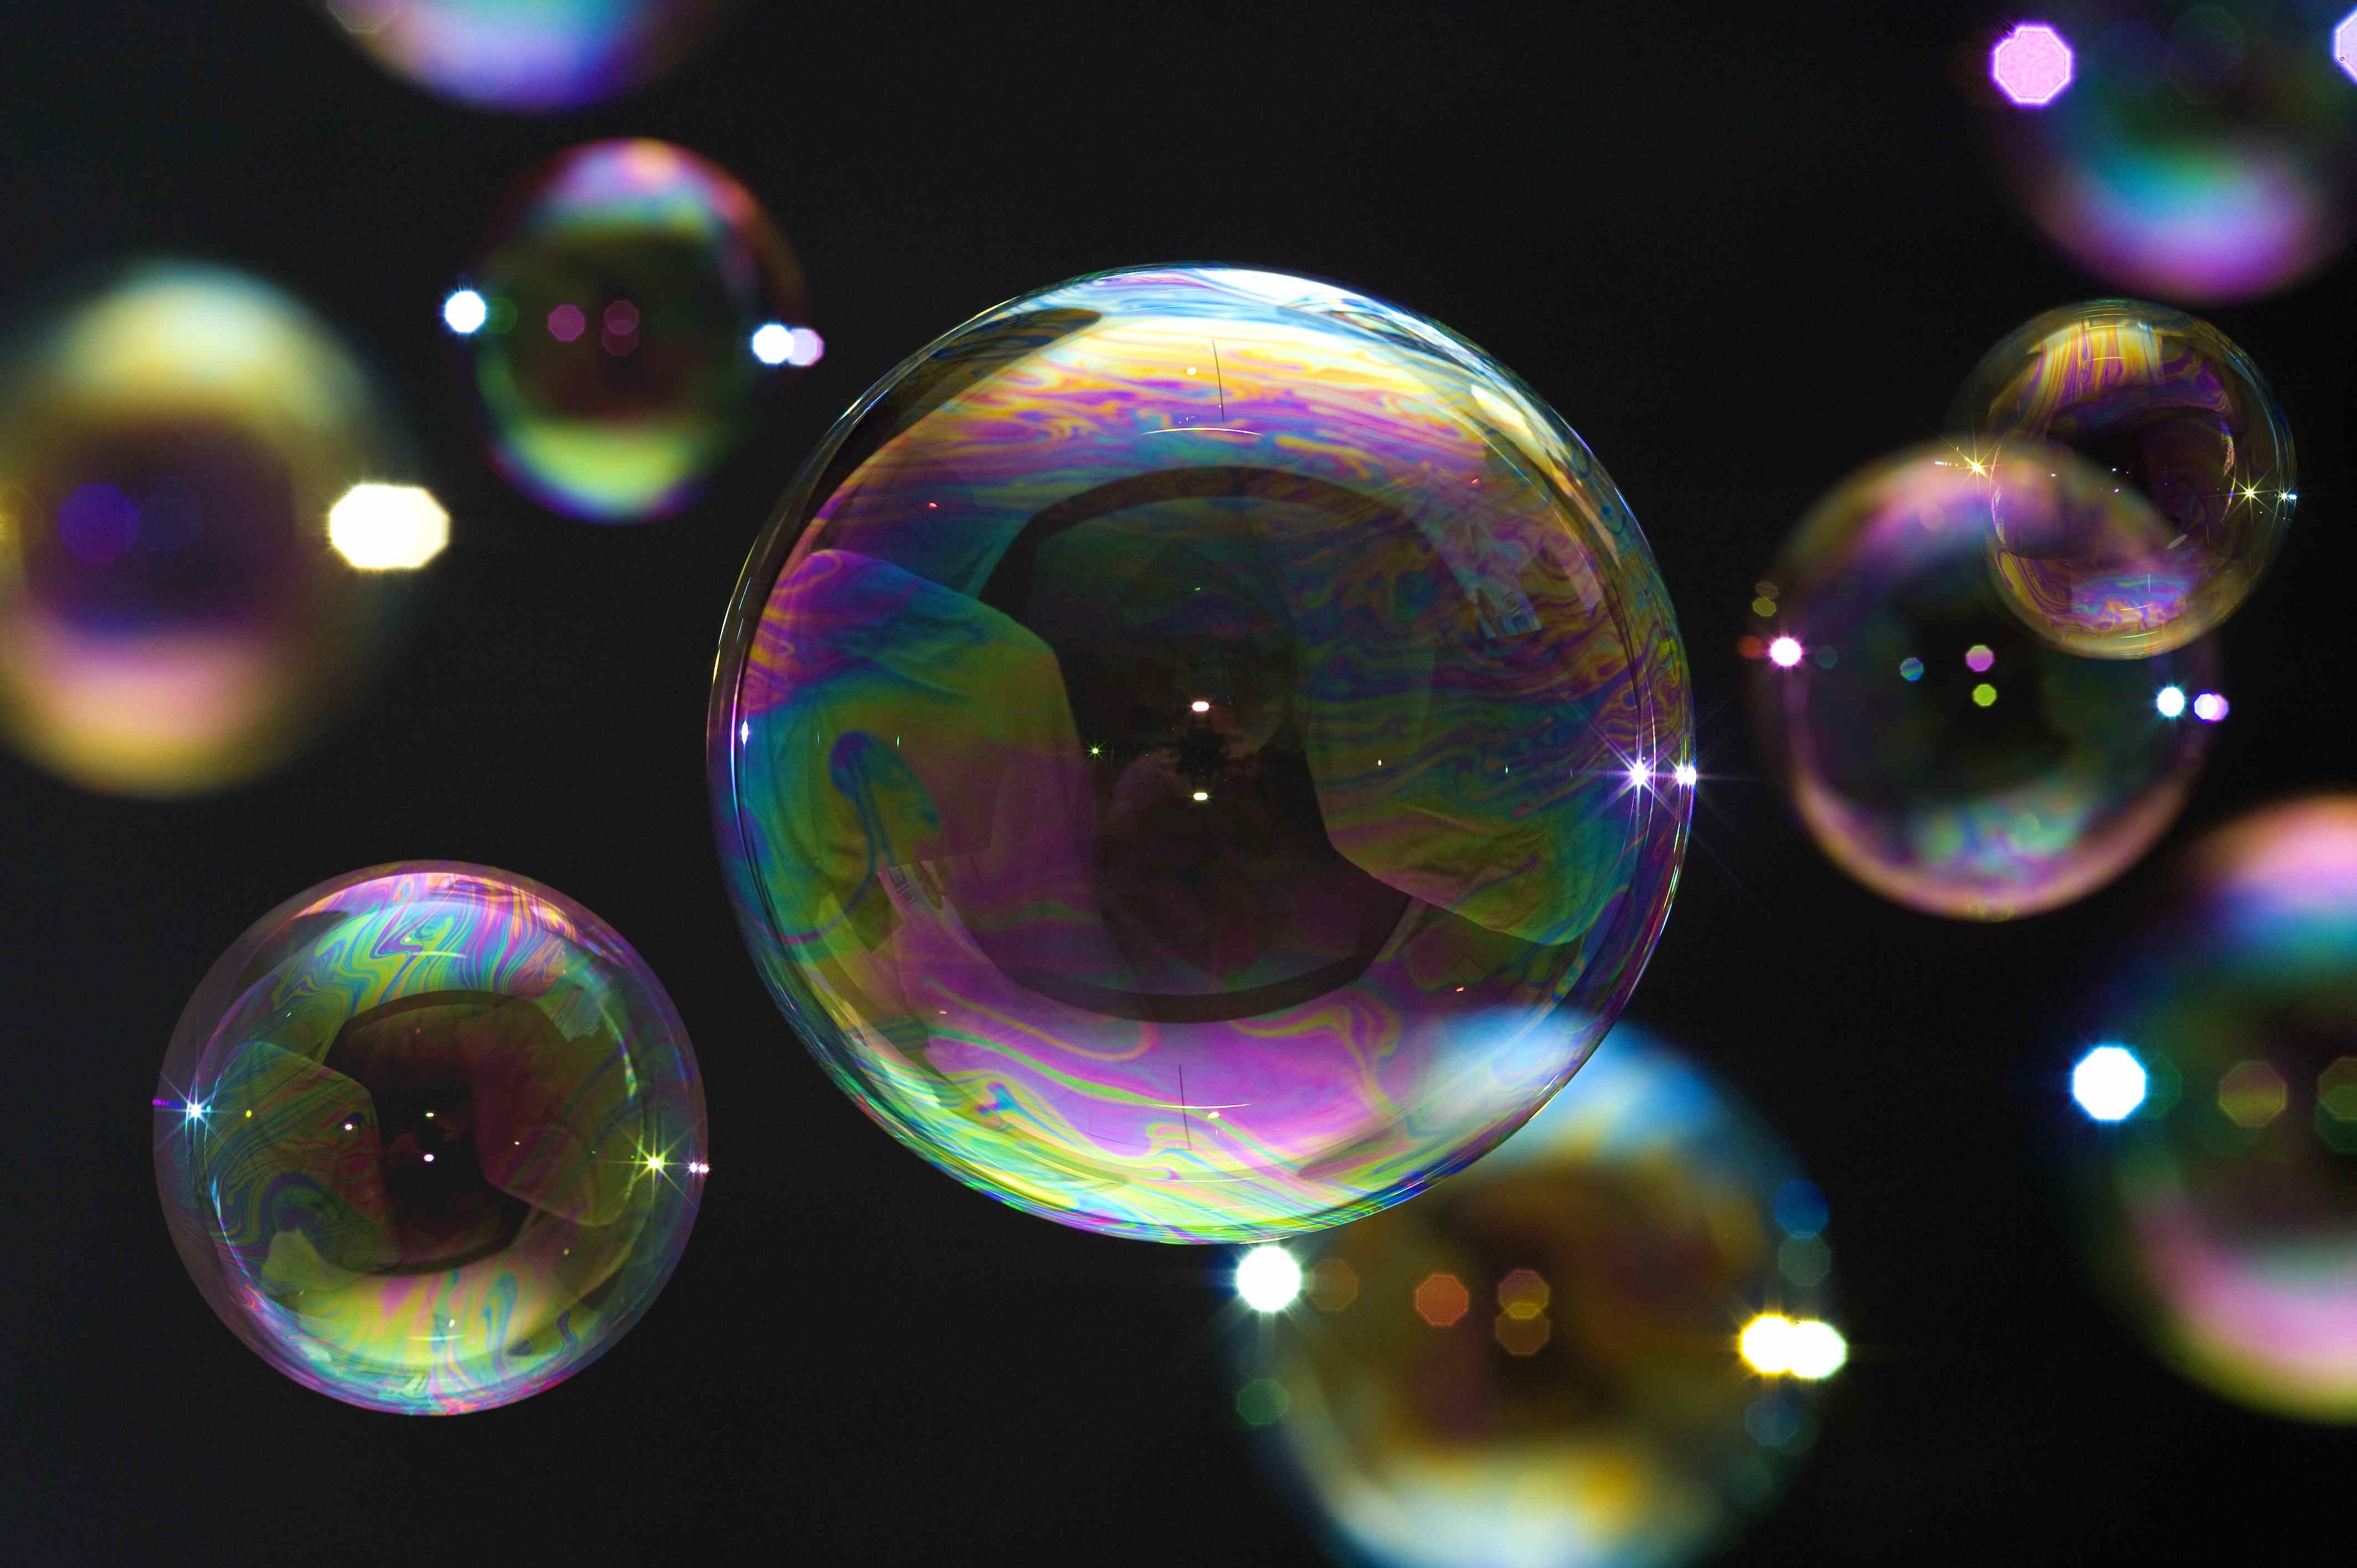 blowing-bubbles-small-113406397_0.jpg